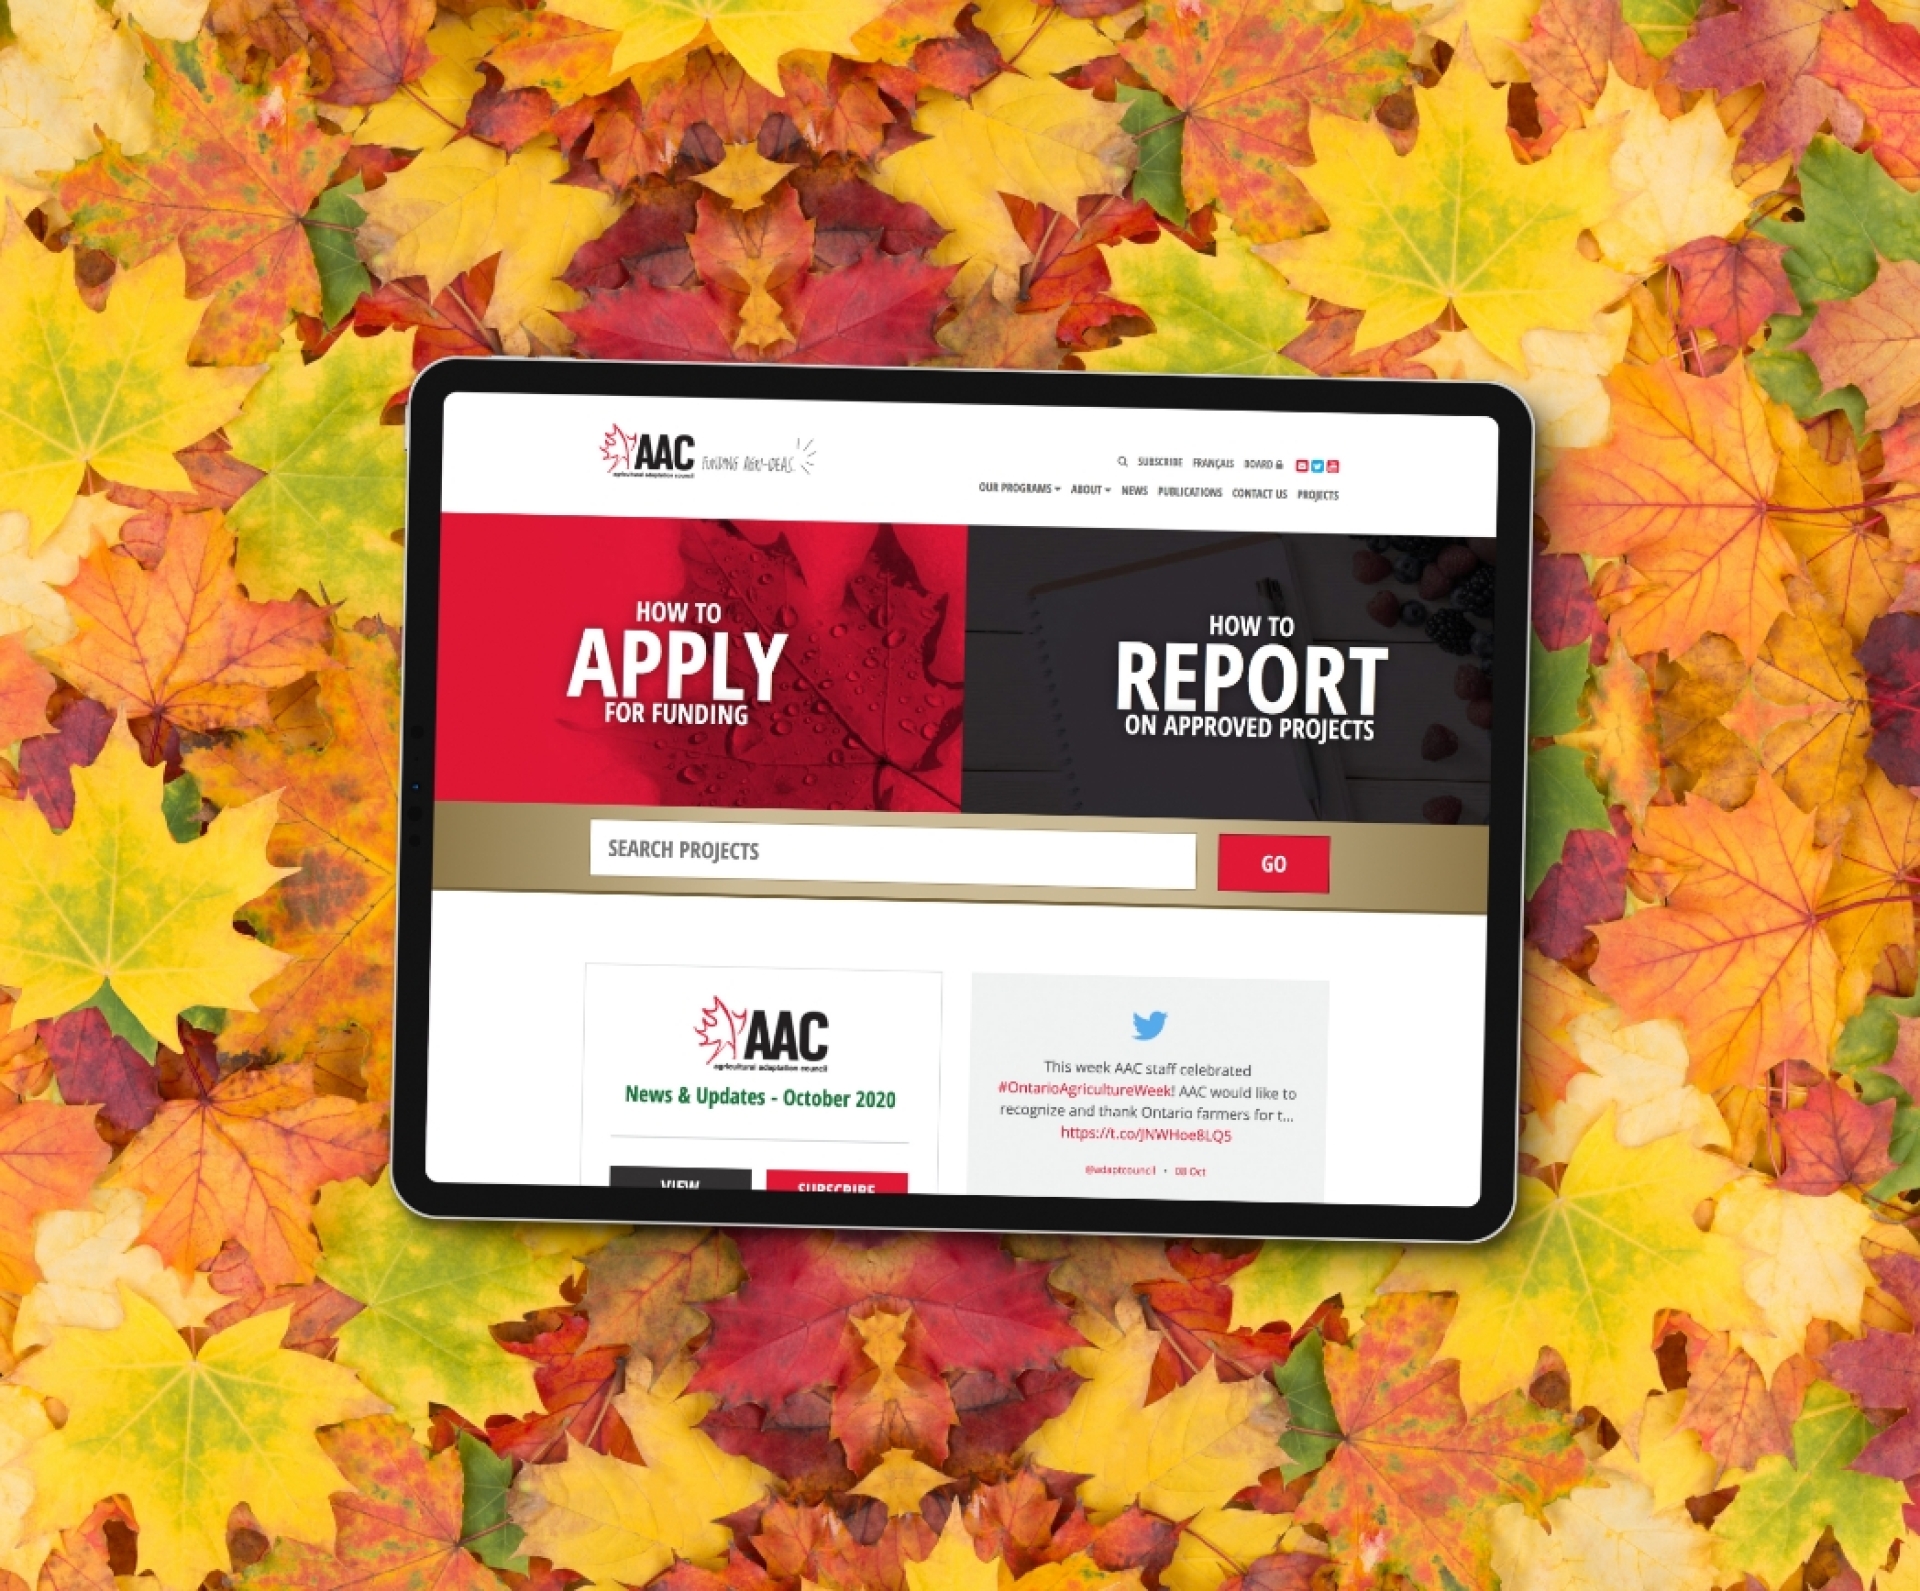 AAC website homepage design on a tablet with autumn leaves in the background